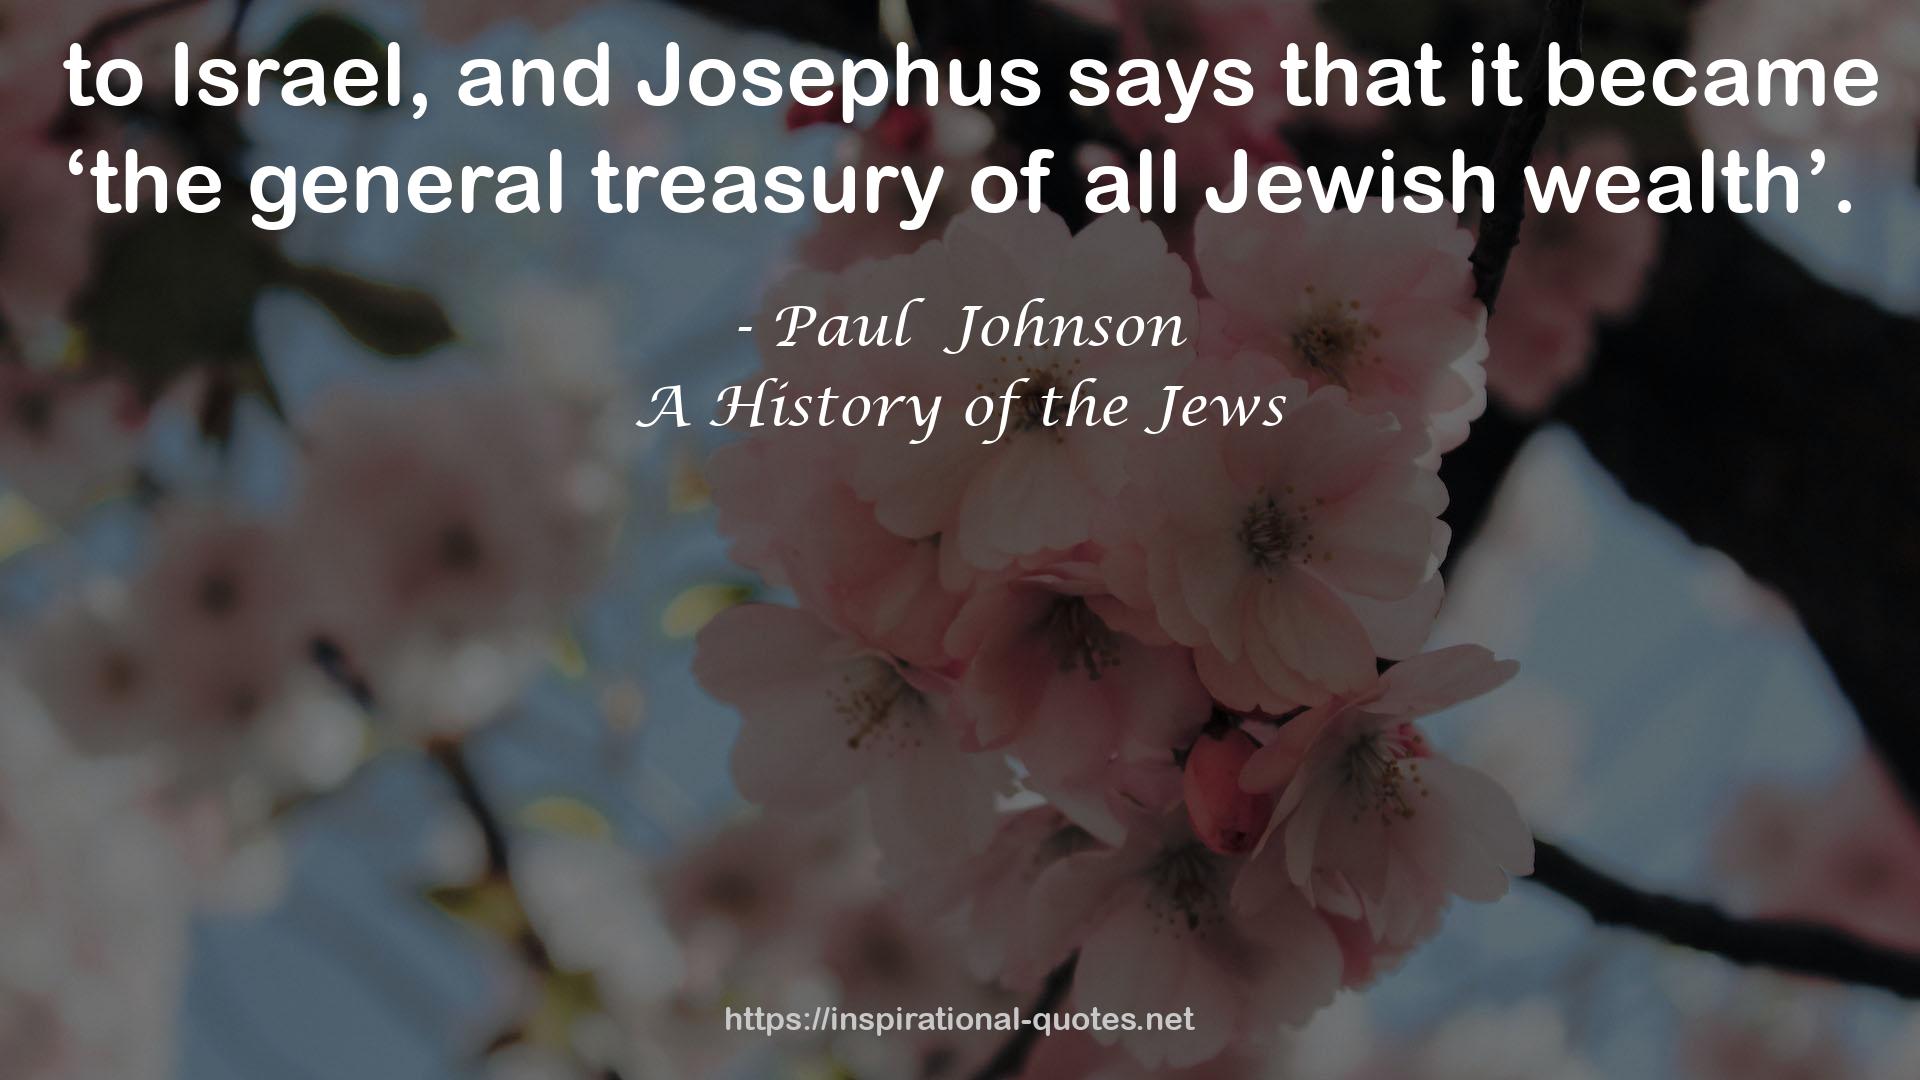 A History of the Jews QUOTES